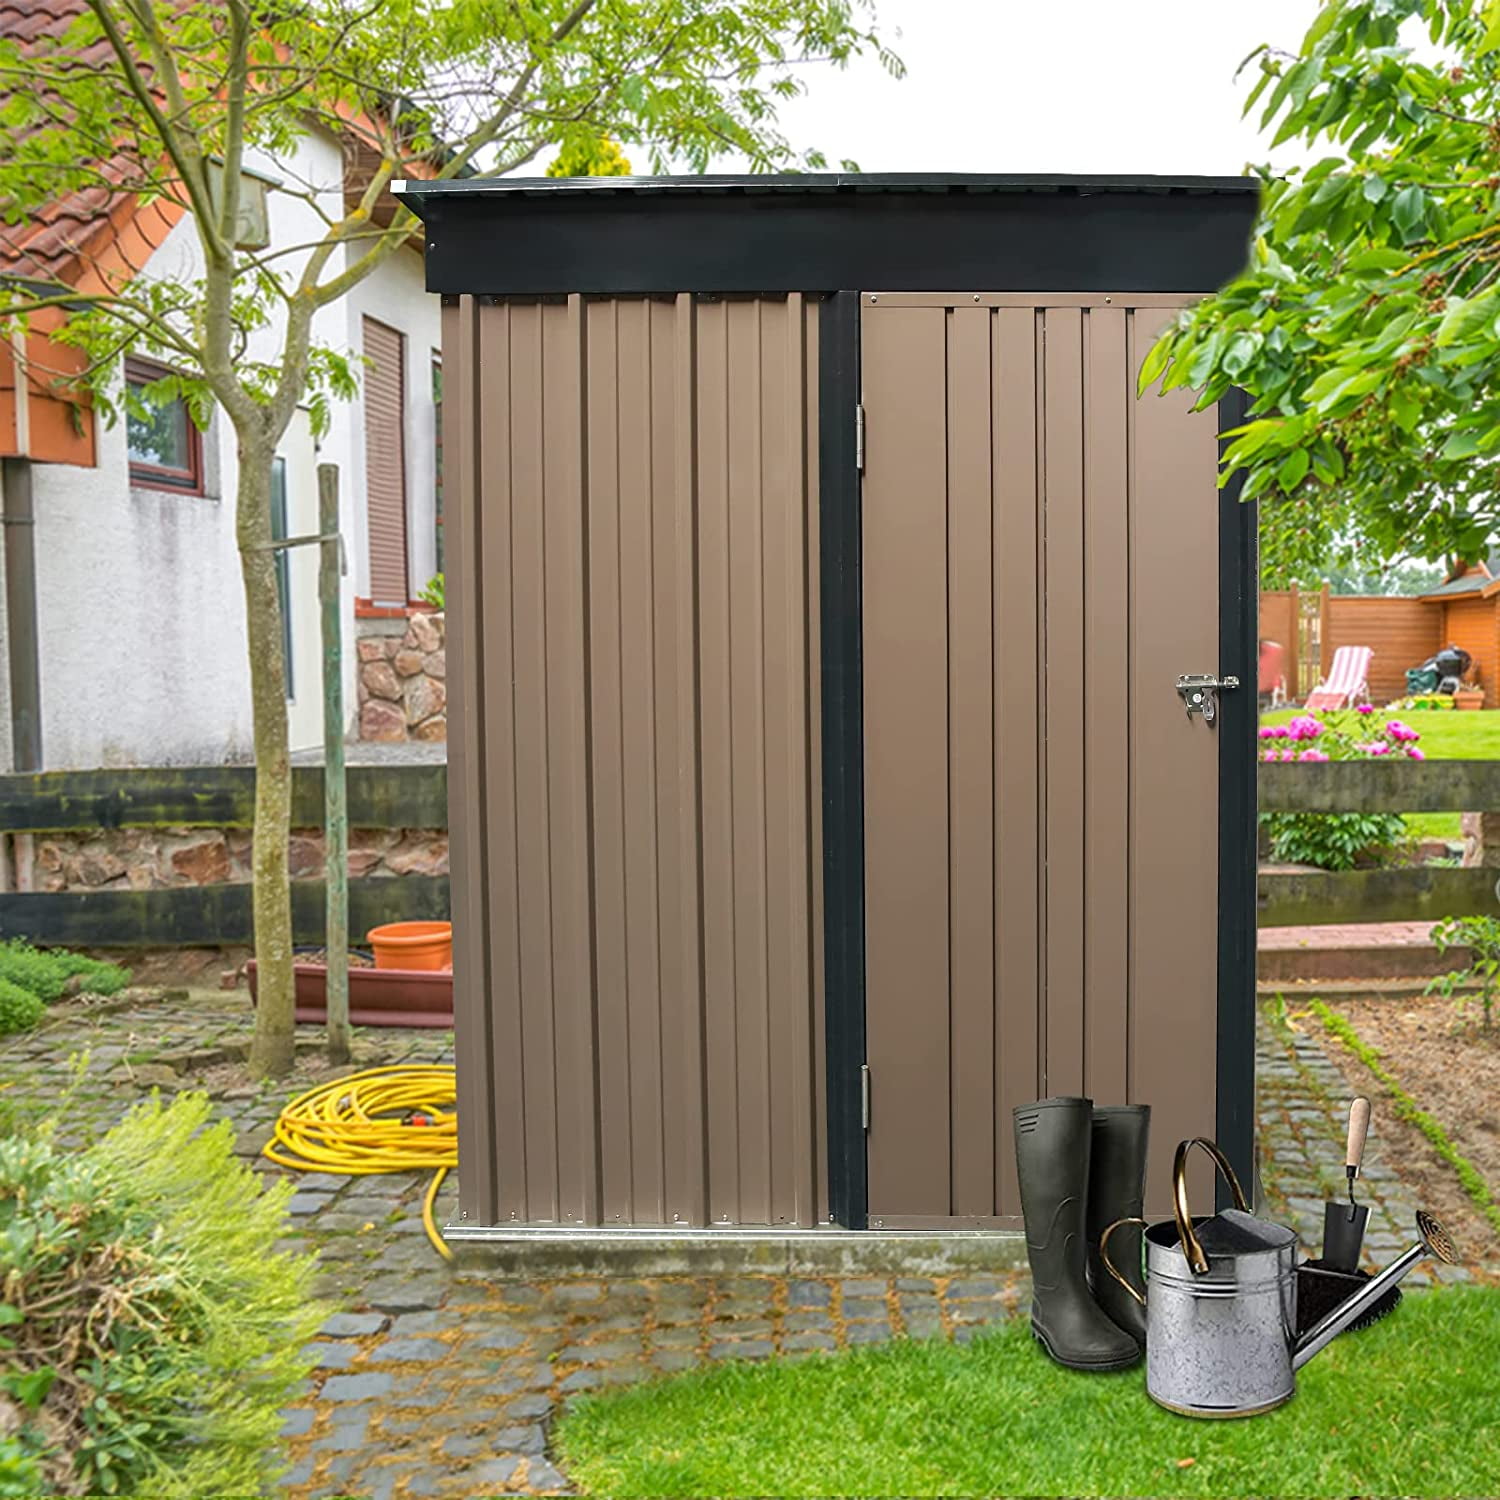 BAHOM Horizontal Outdoor Storage Shed 4X6 FT with Floor Base Grey Lockable Organizer for Garden Patio Backyard Tools and Accessories 